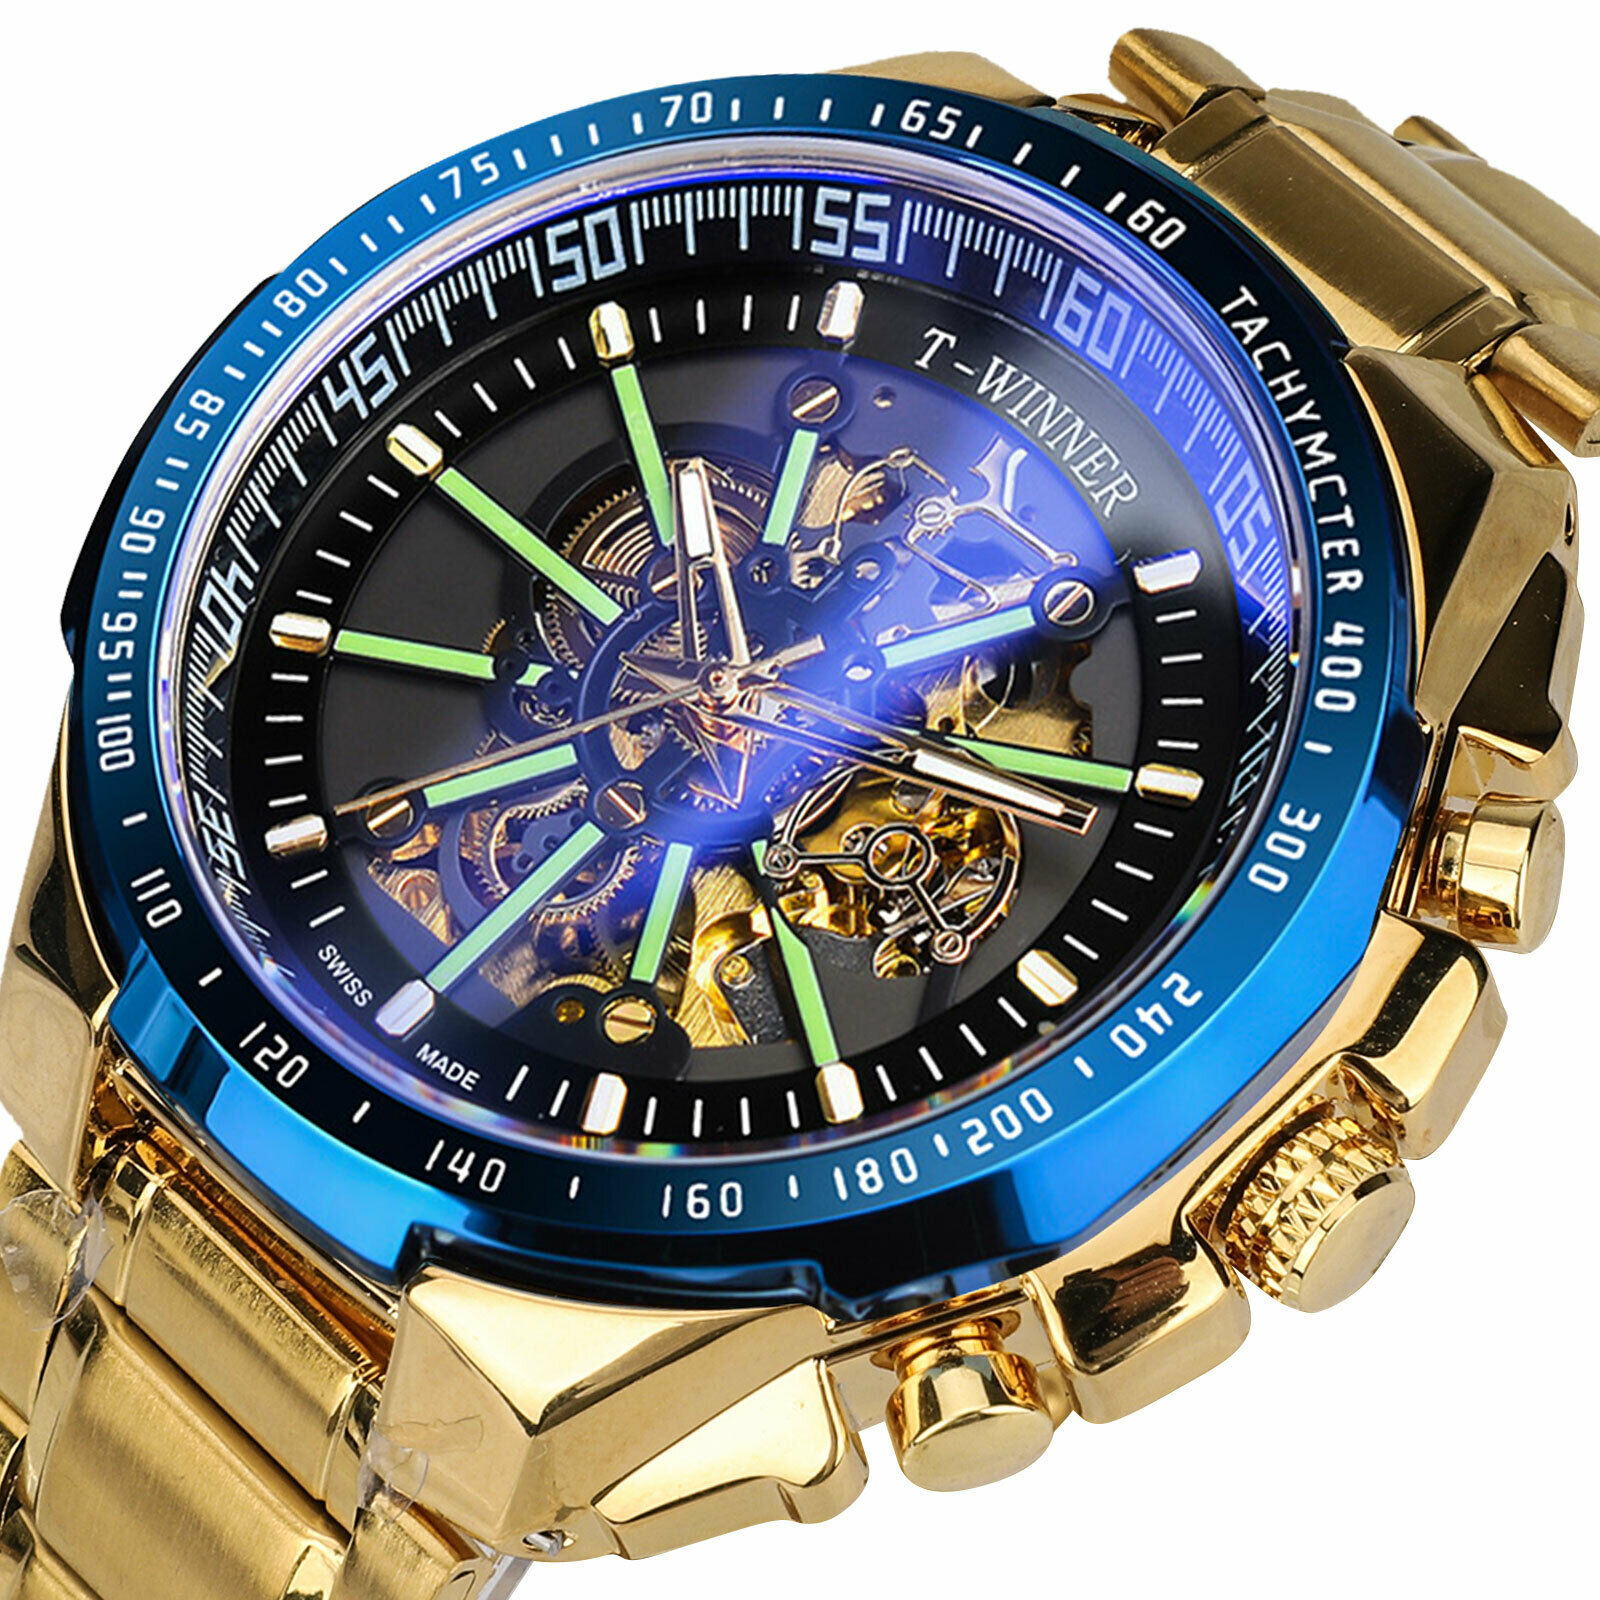 Luxury Men's Stainless Steel Skeleton Gold Tone Automatic Mechanical Wrist Watch